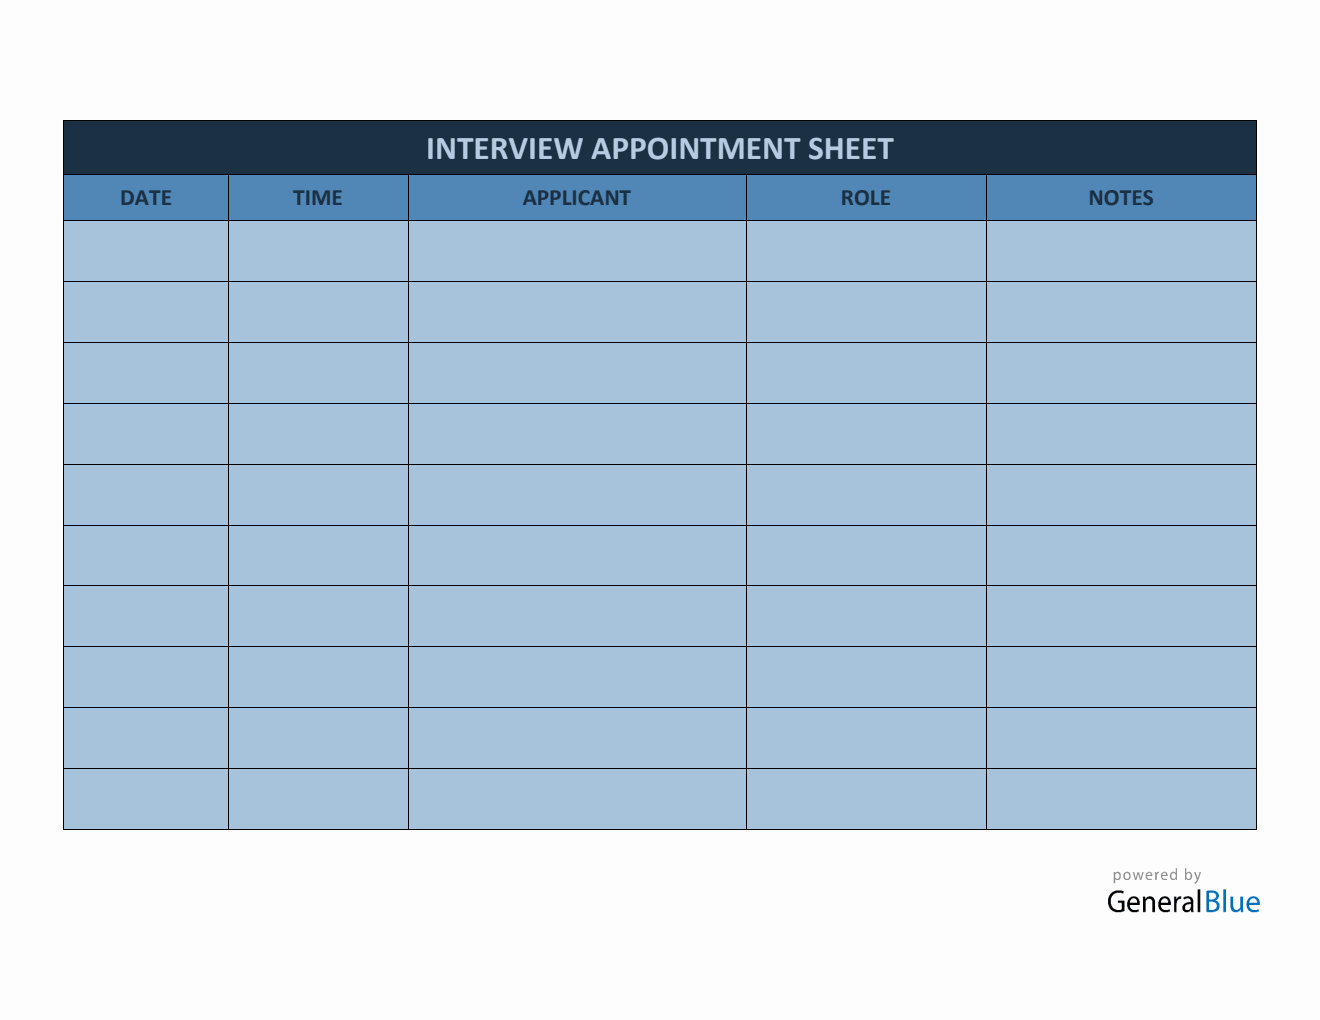 Interview Appointment Sheet Template in PDF (Colorful)